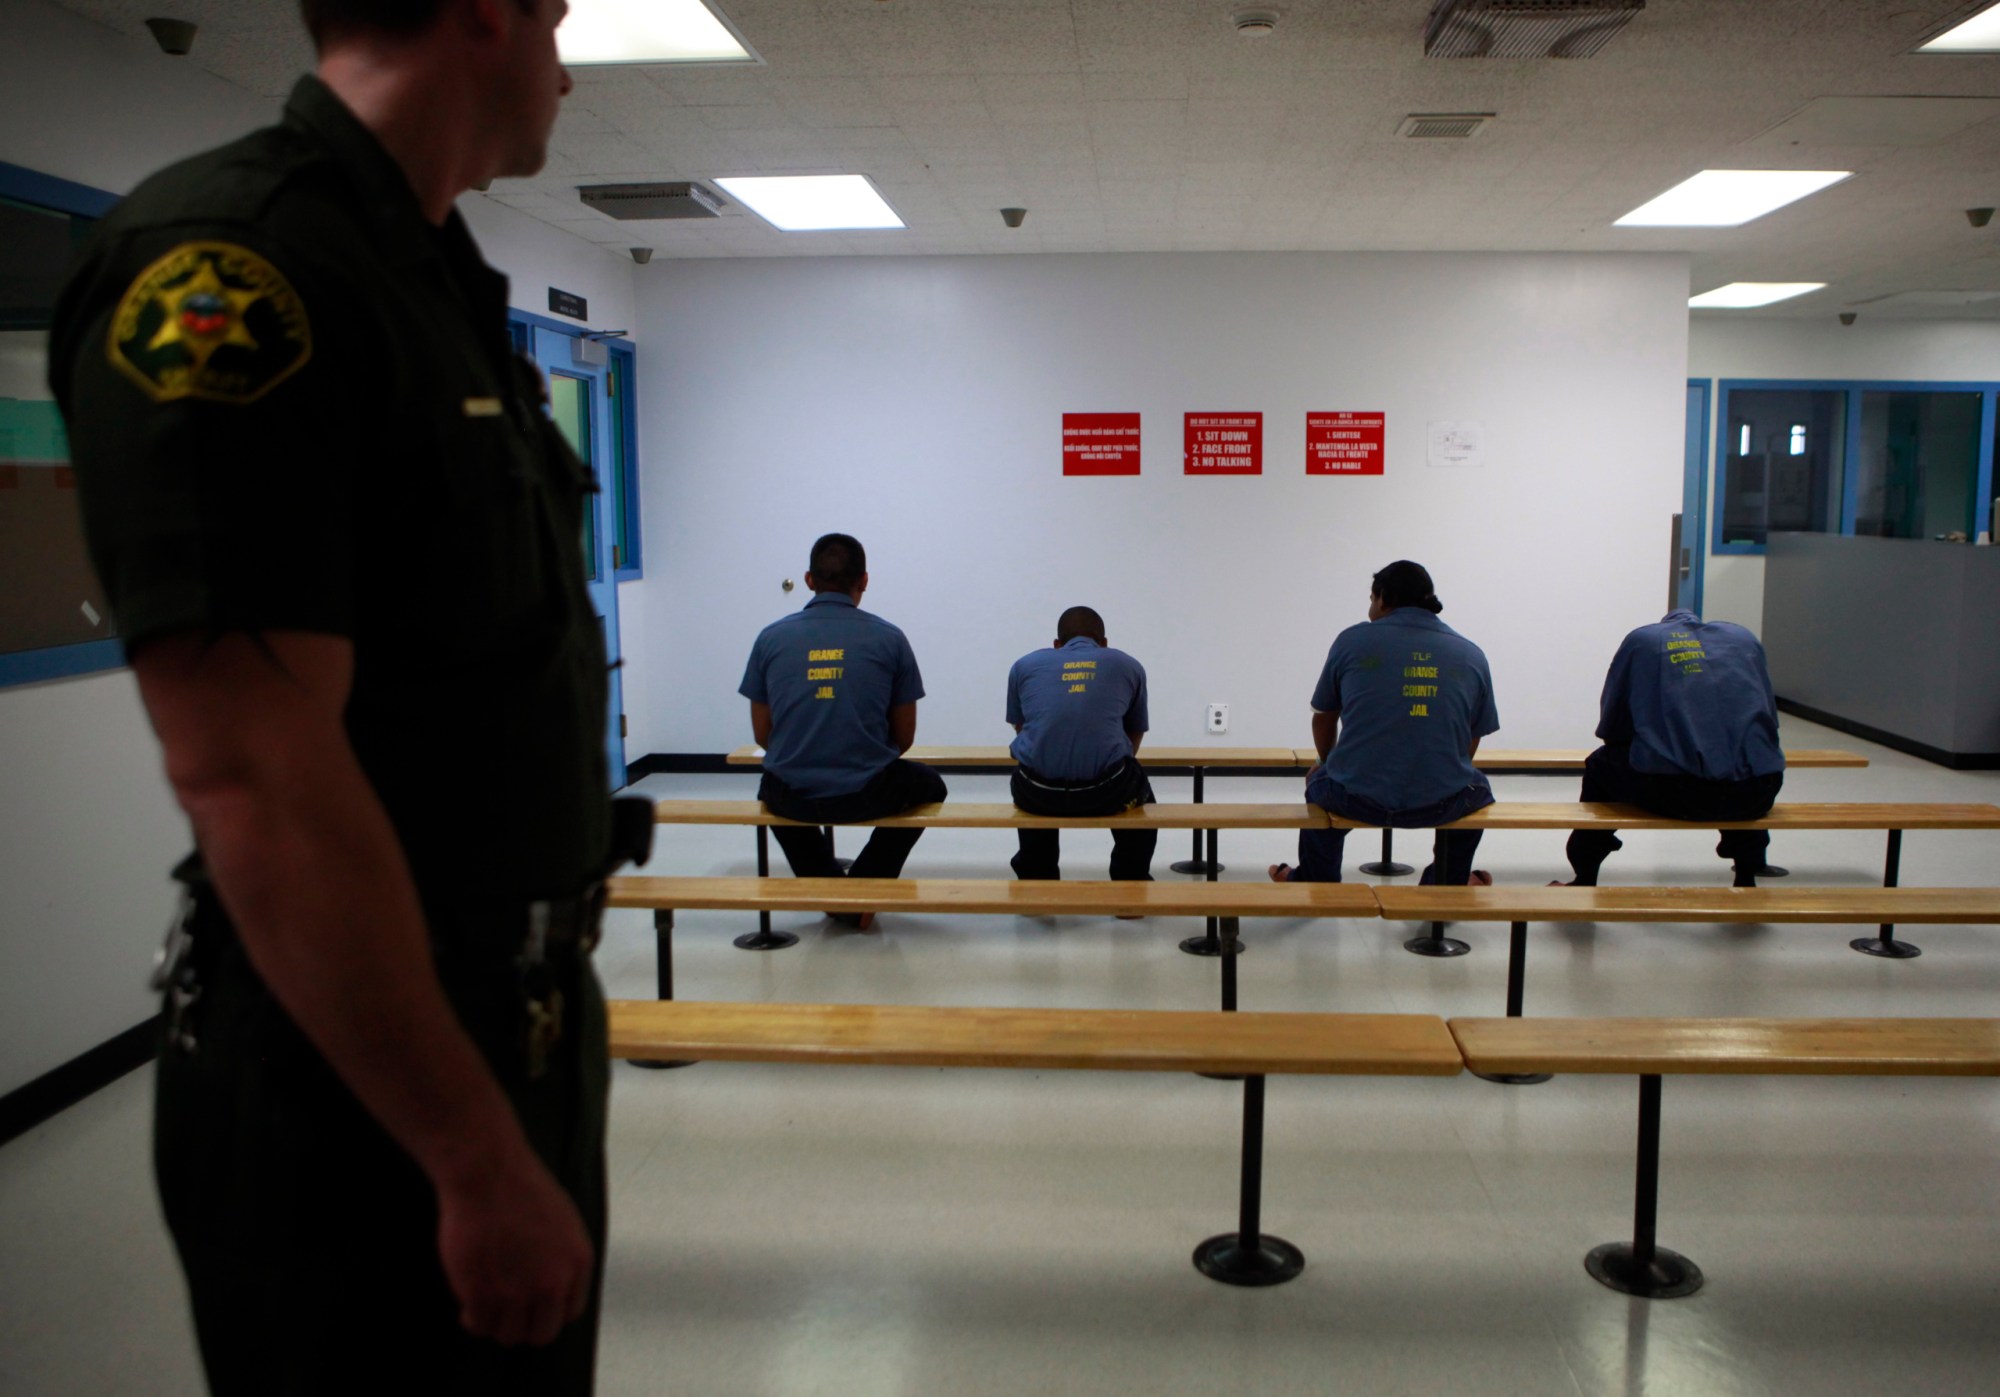 An Orange County Sheriff's deputy keeps a watch over a group of immigration detainees in the medical and dental care area at the Theo Lacy Facility in Orange, Calif., Tuesday, Sept. 28, 2010. Hundreds of detained immigrants are being transferred to Orange County jails, and more are on the way, under a deal with the federal government that would bring the cash-strapped Orange County Sheriff's Department up to $30 million a year, a newspaper reported Sunday. (AP Photo/Jae C. Hong)